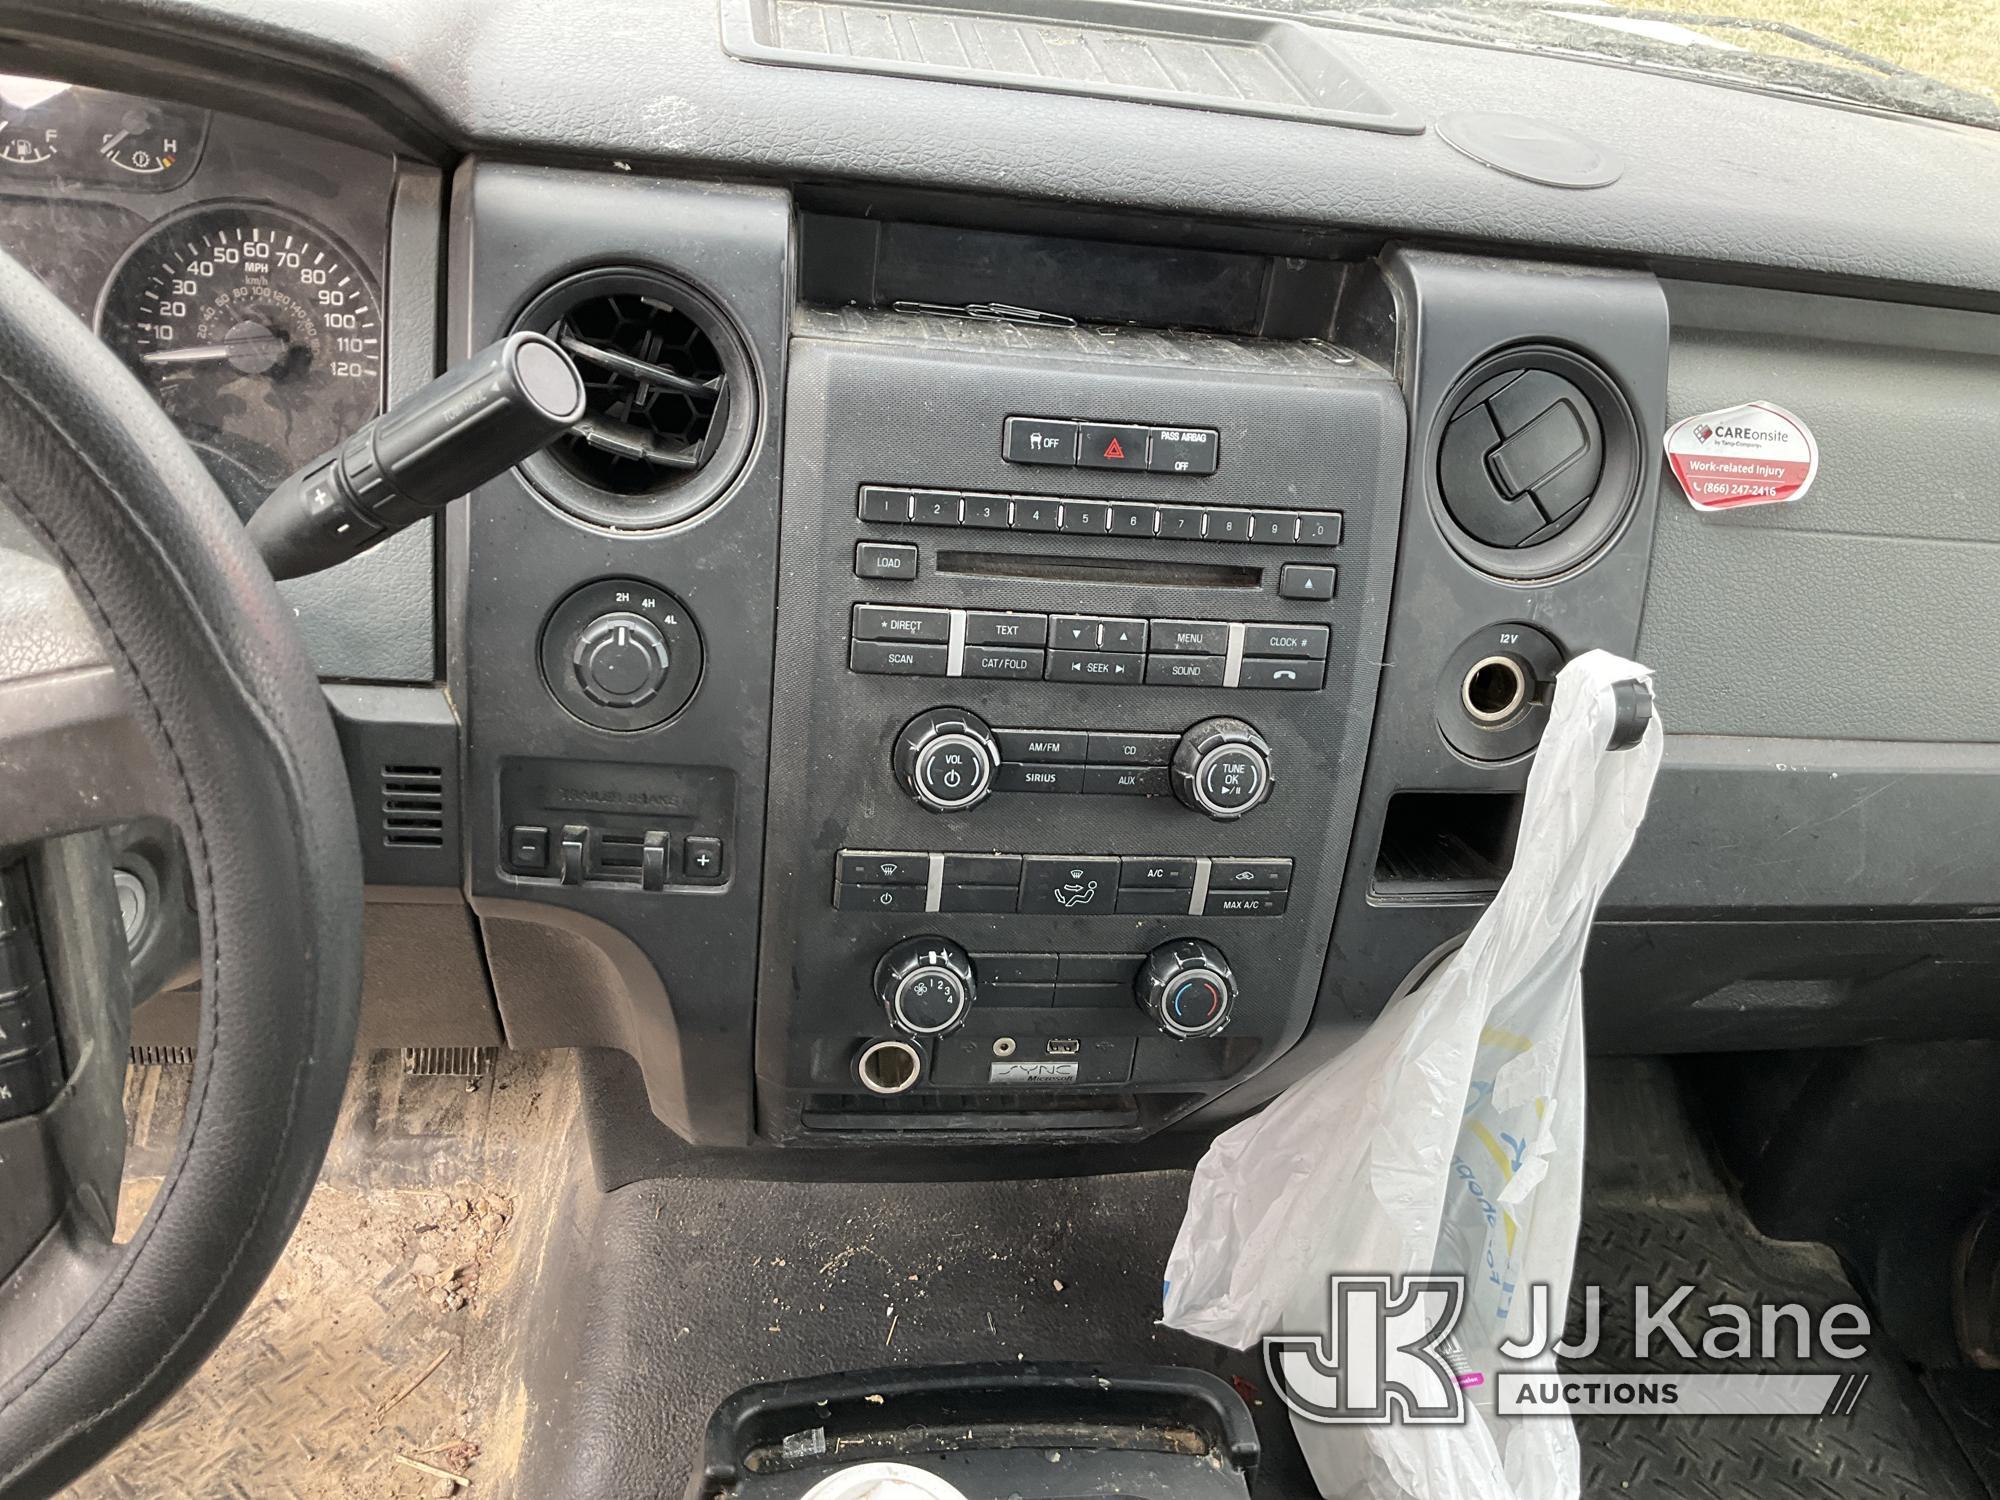 (Hawk Point, MO) 2011 Ford F150 4x4 Pickup Truck Power to dash, non running, unknown condition.